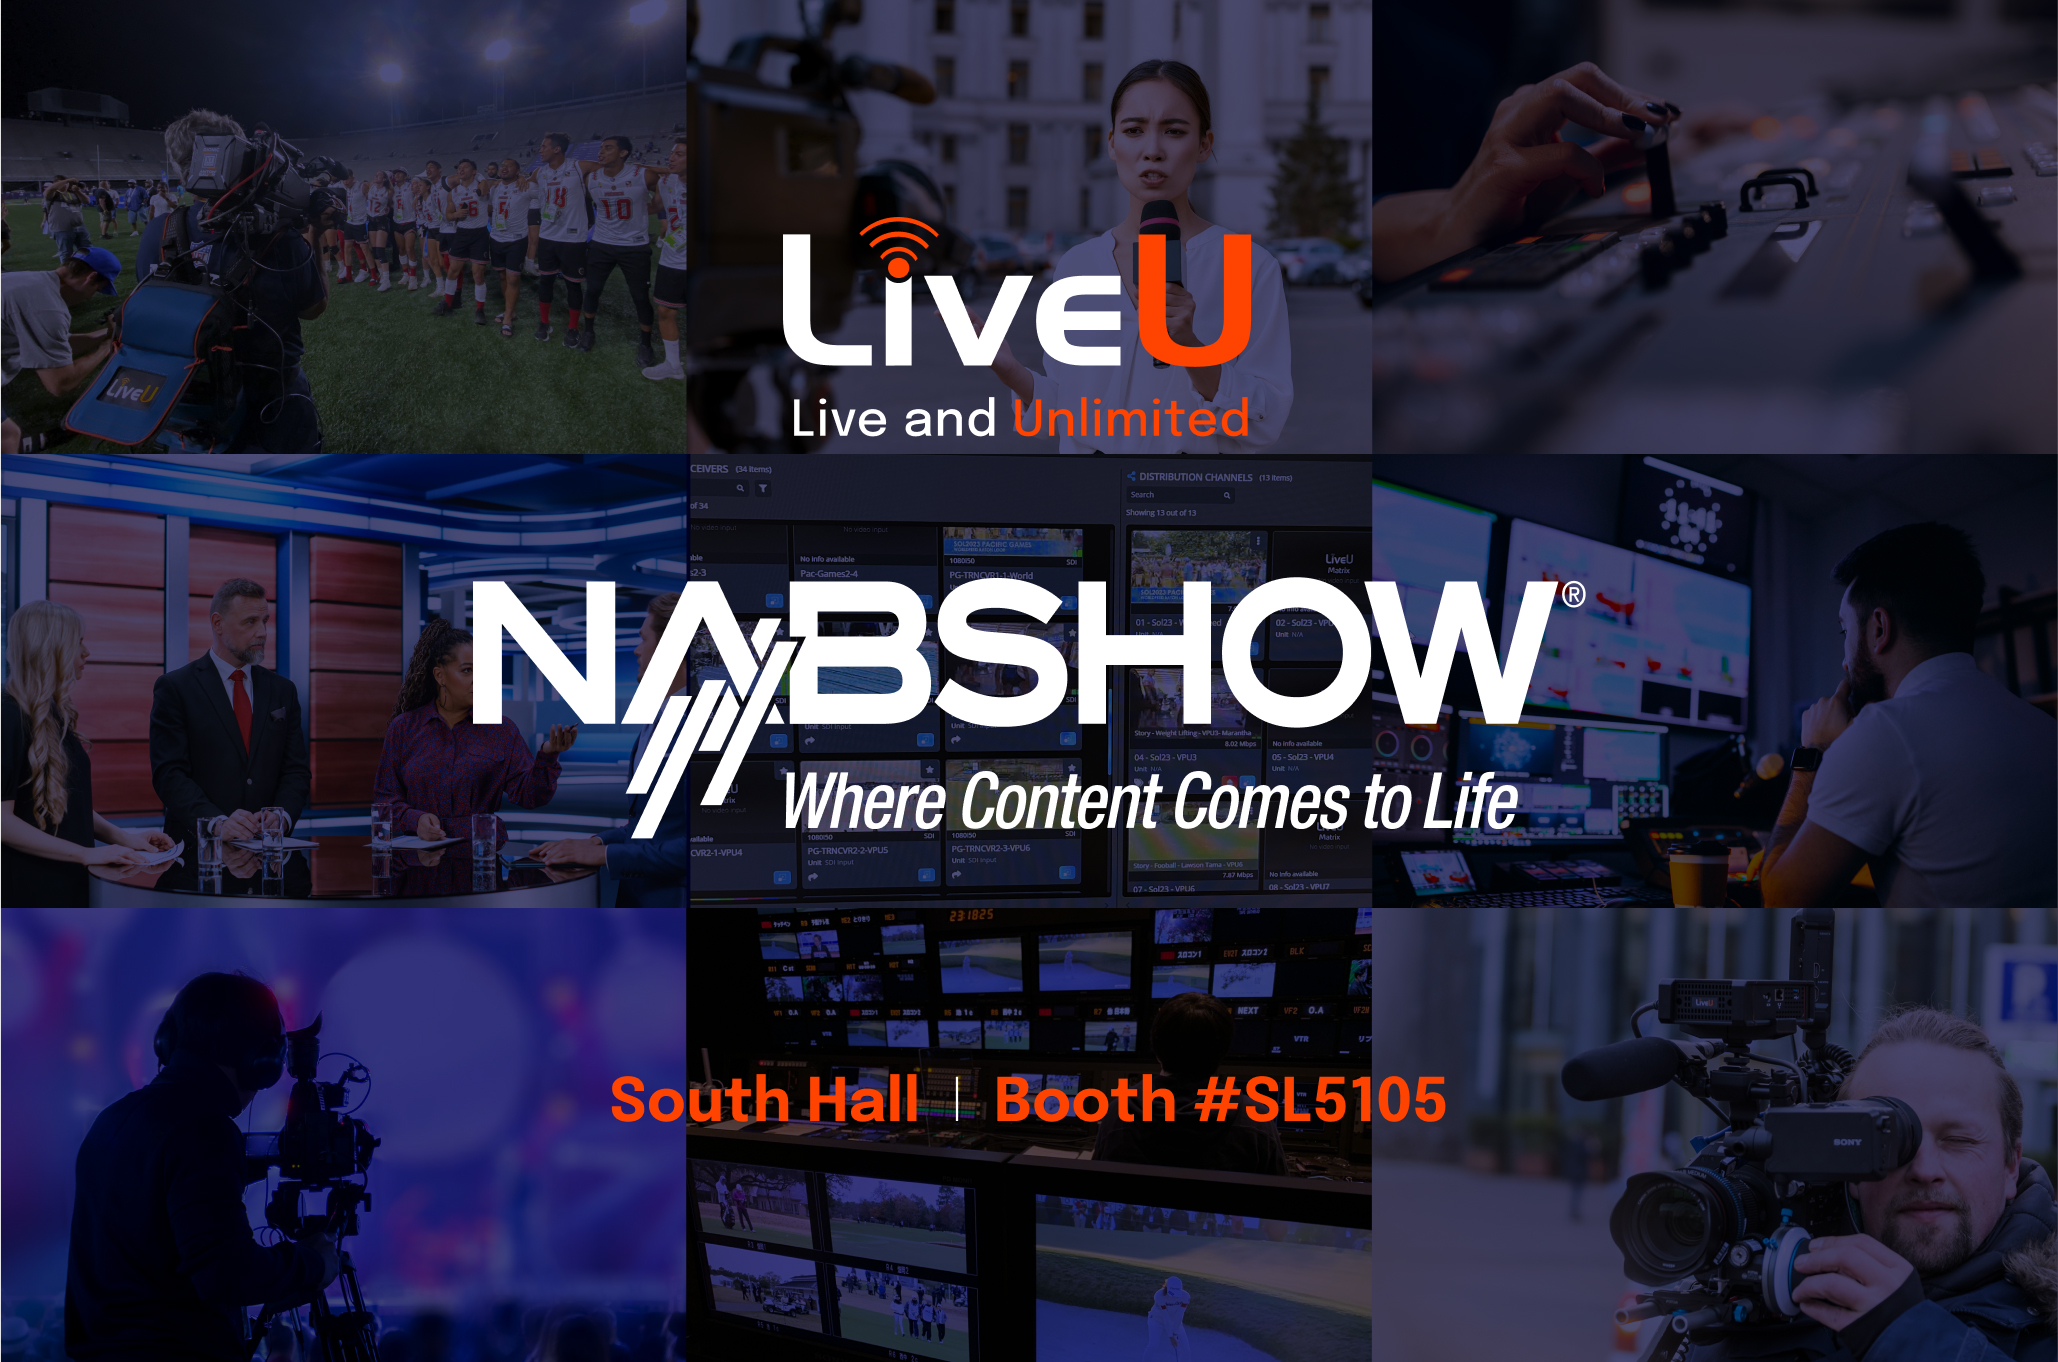 LiveU Delivers the Power of IP-Video, Live and Unlimited, to Every Type of Content Creator at NAB Show Las Vegas